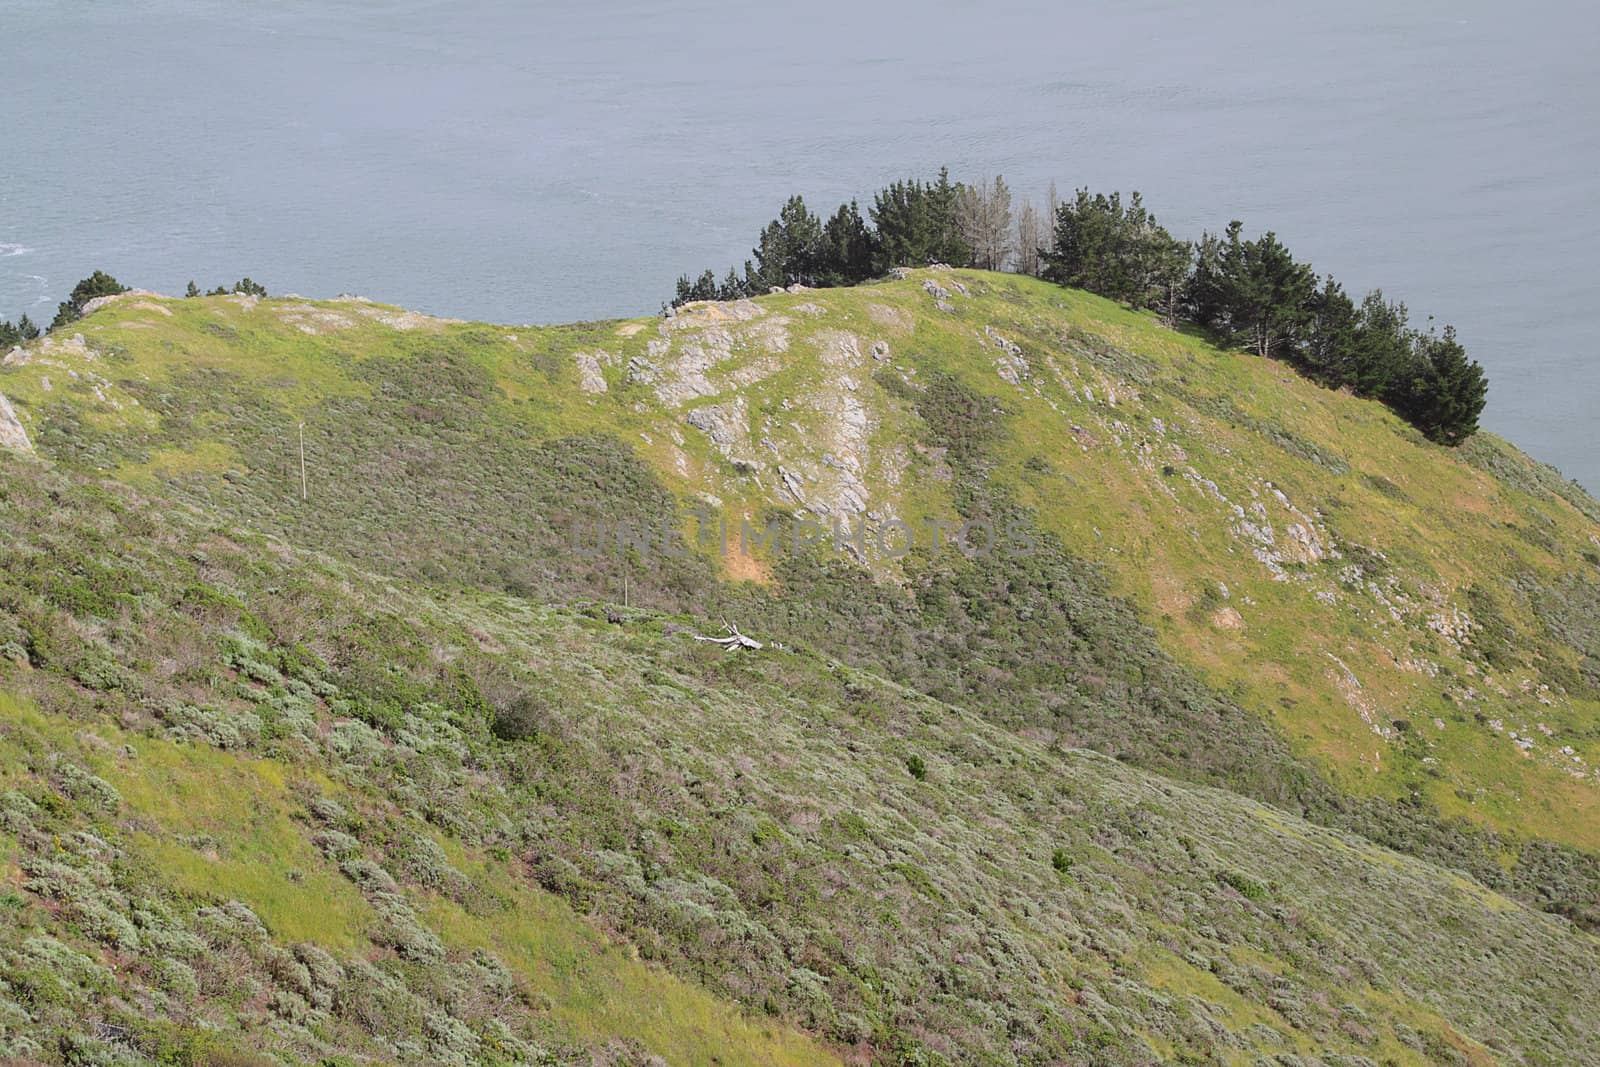 A hill with trees by the ocean on overcast day